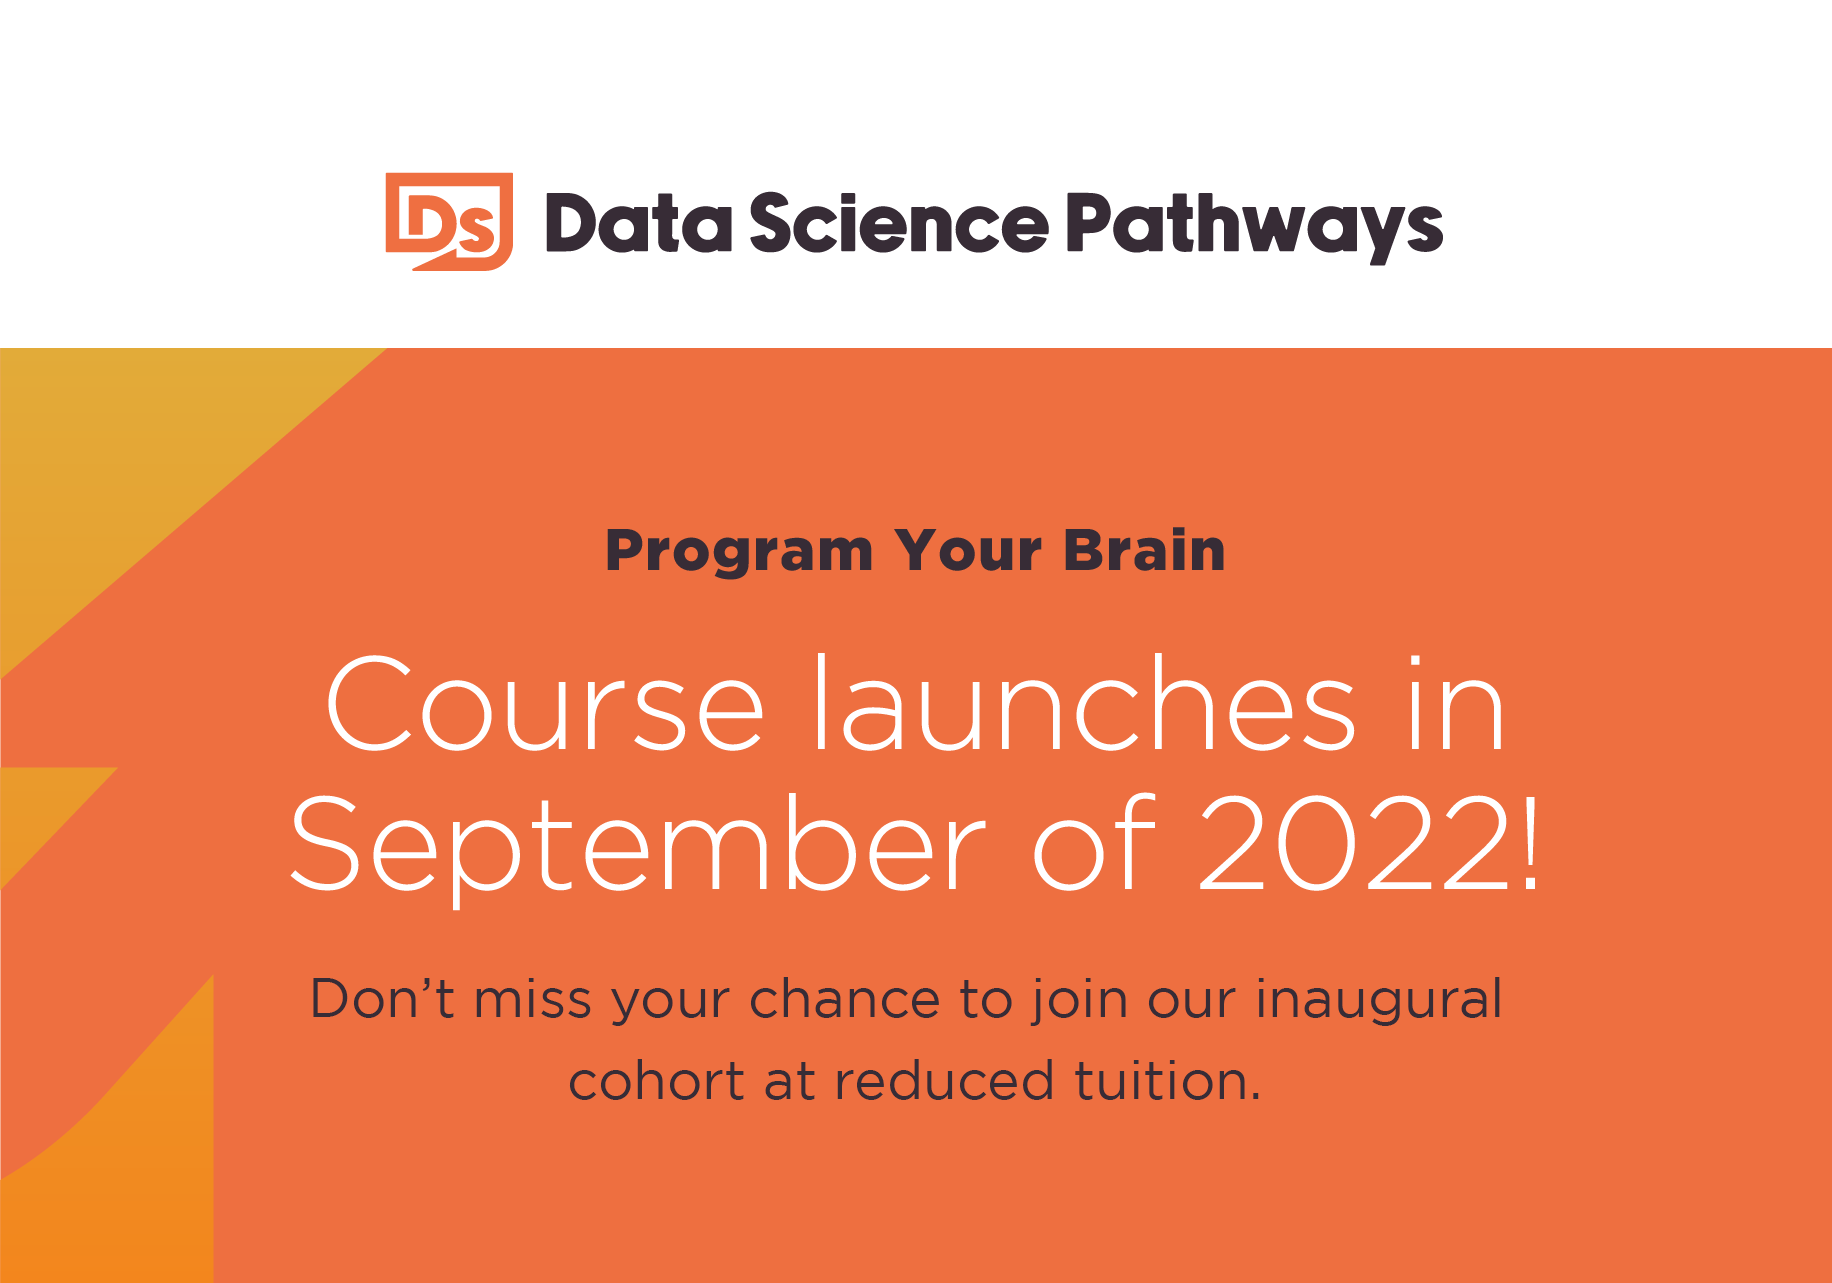 The Data Science Pathways course launches in September of 2022!